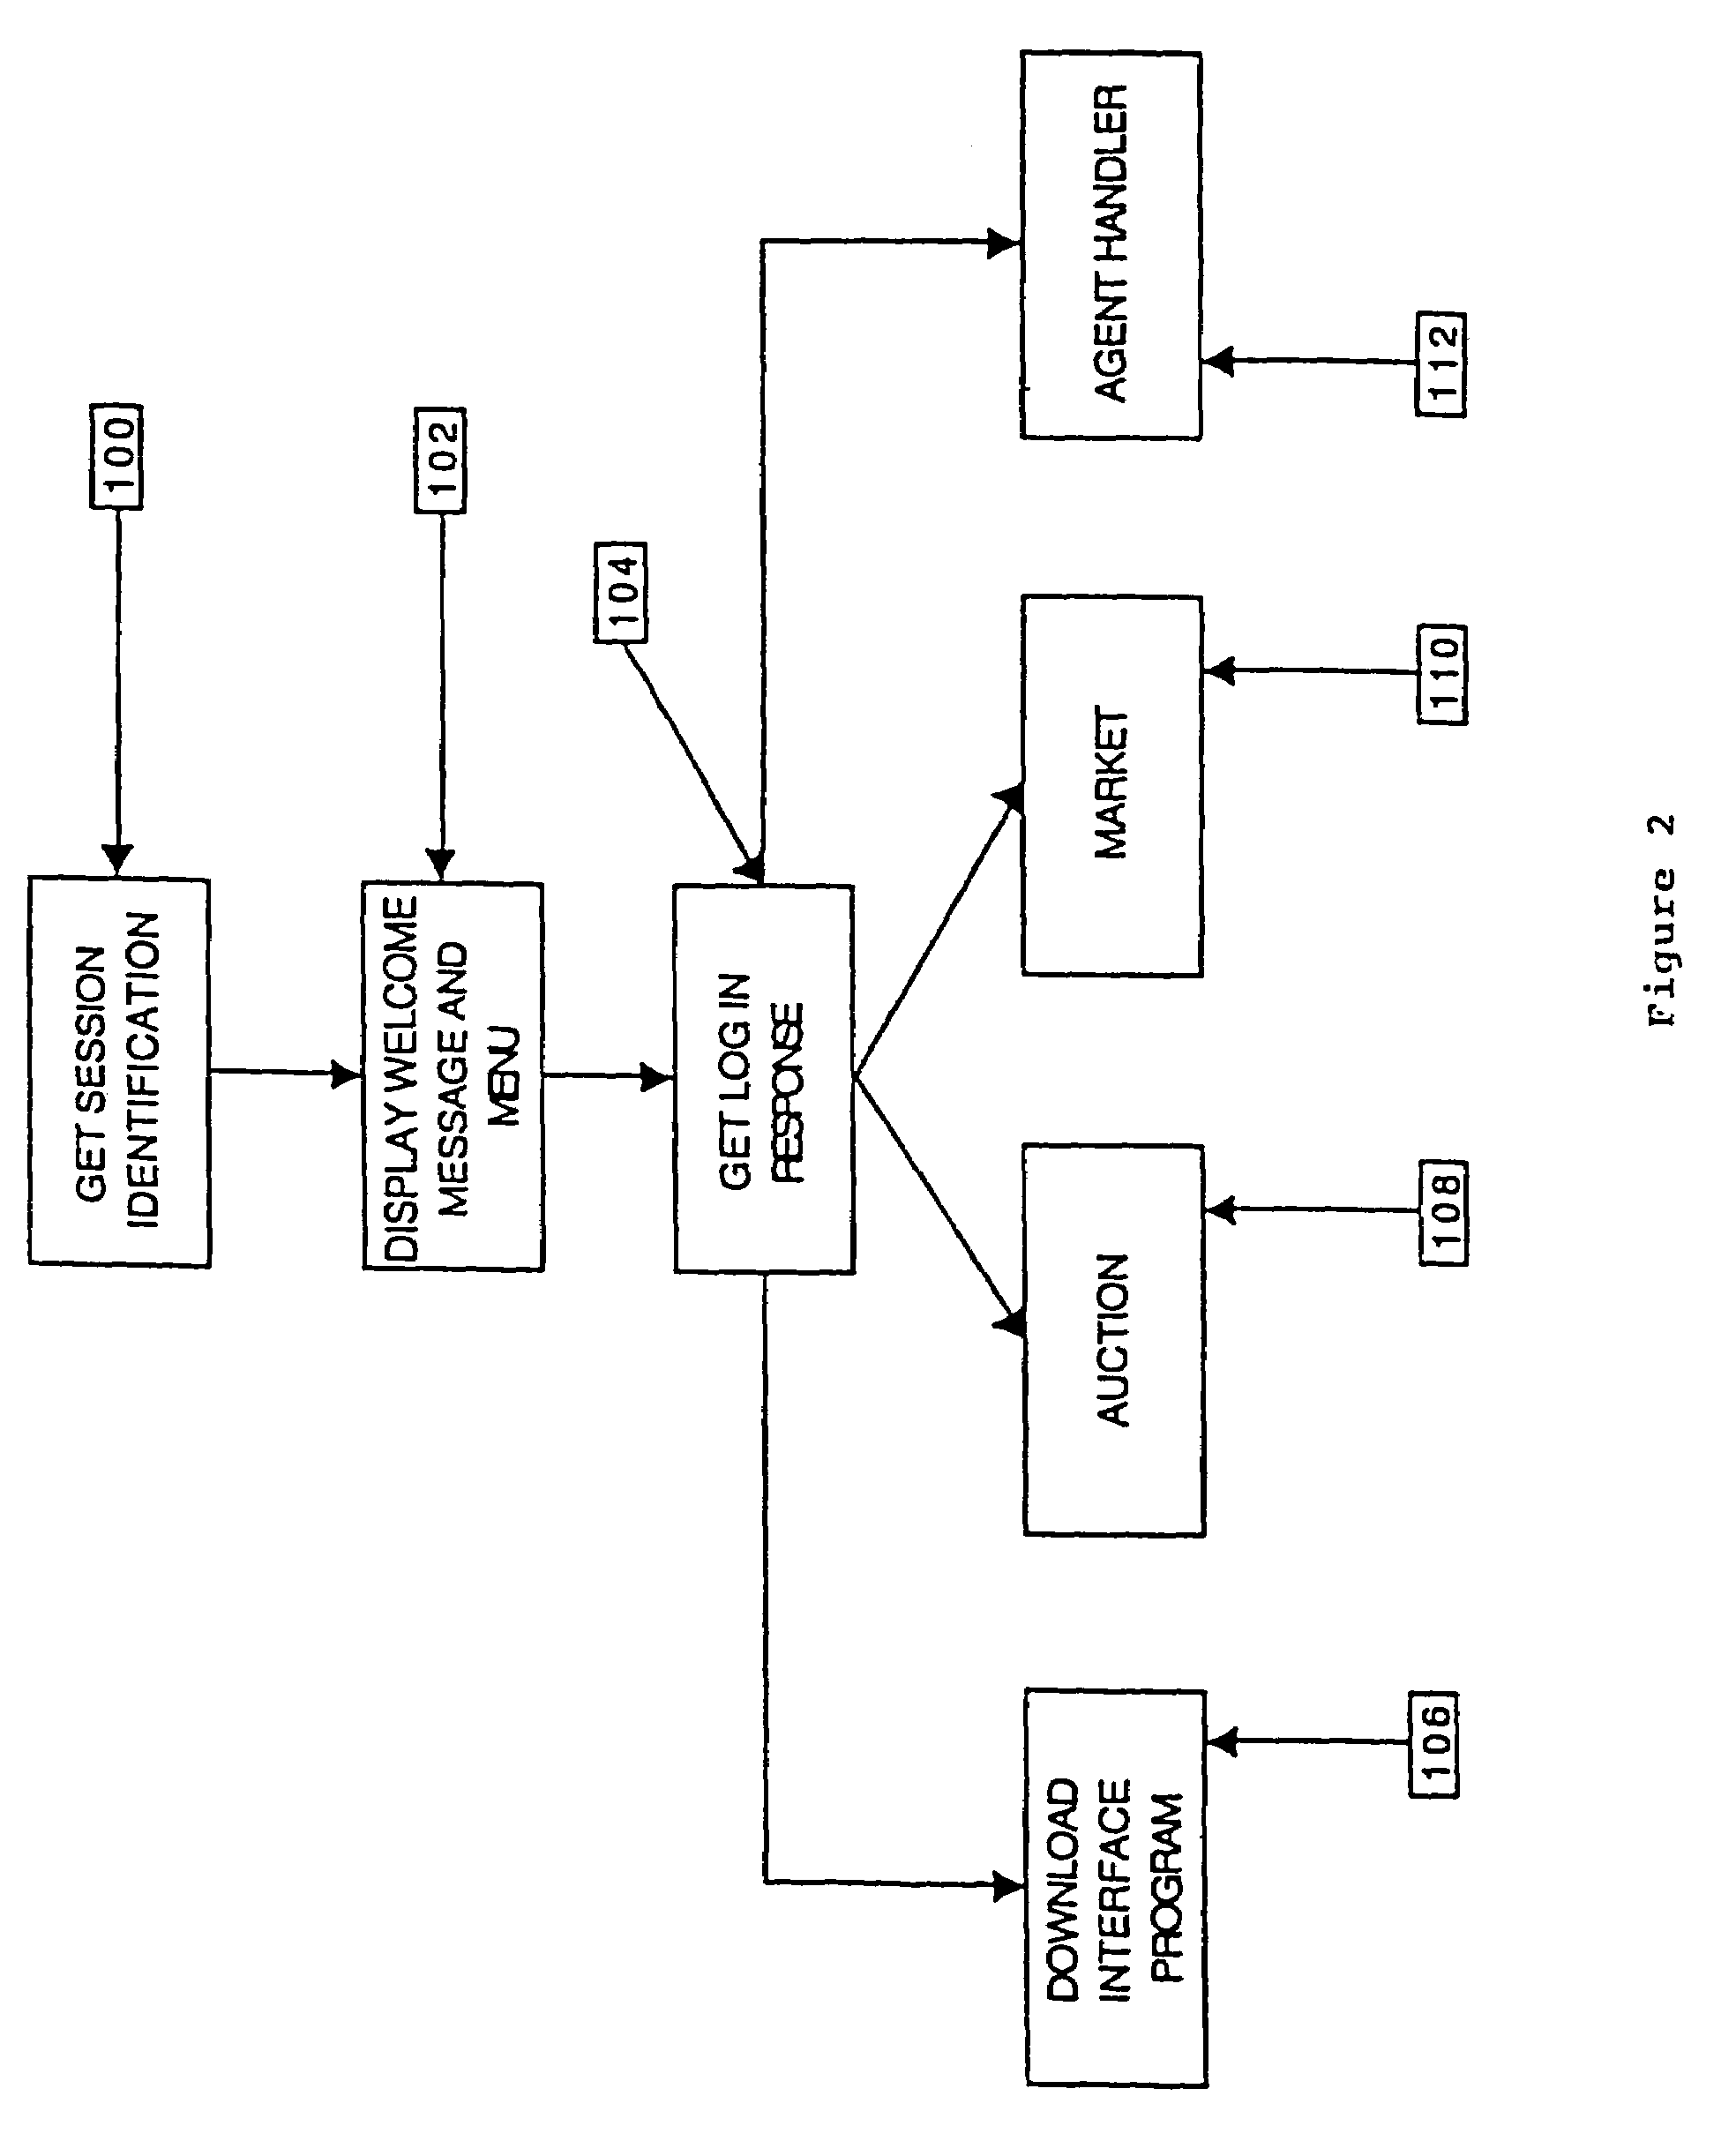 Method for facilitating commerce at an internet-based auction